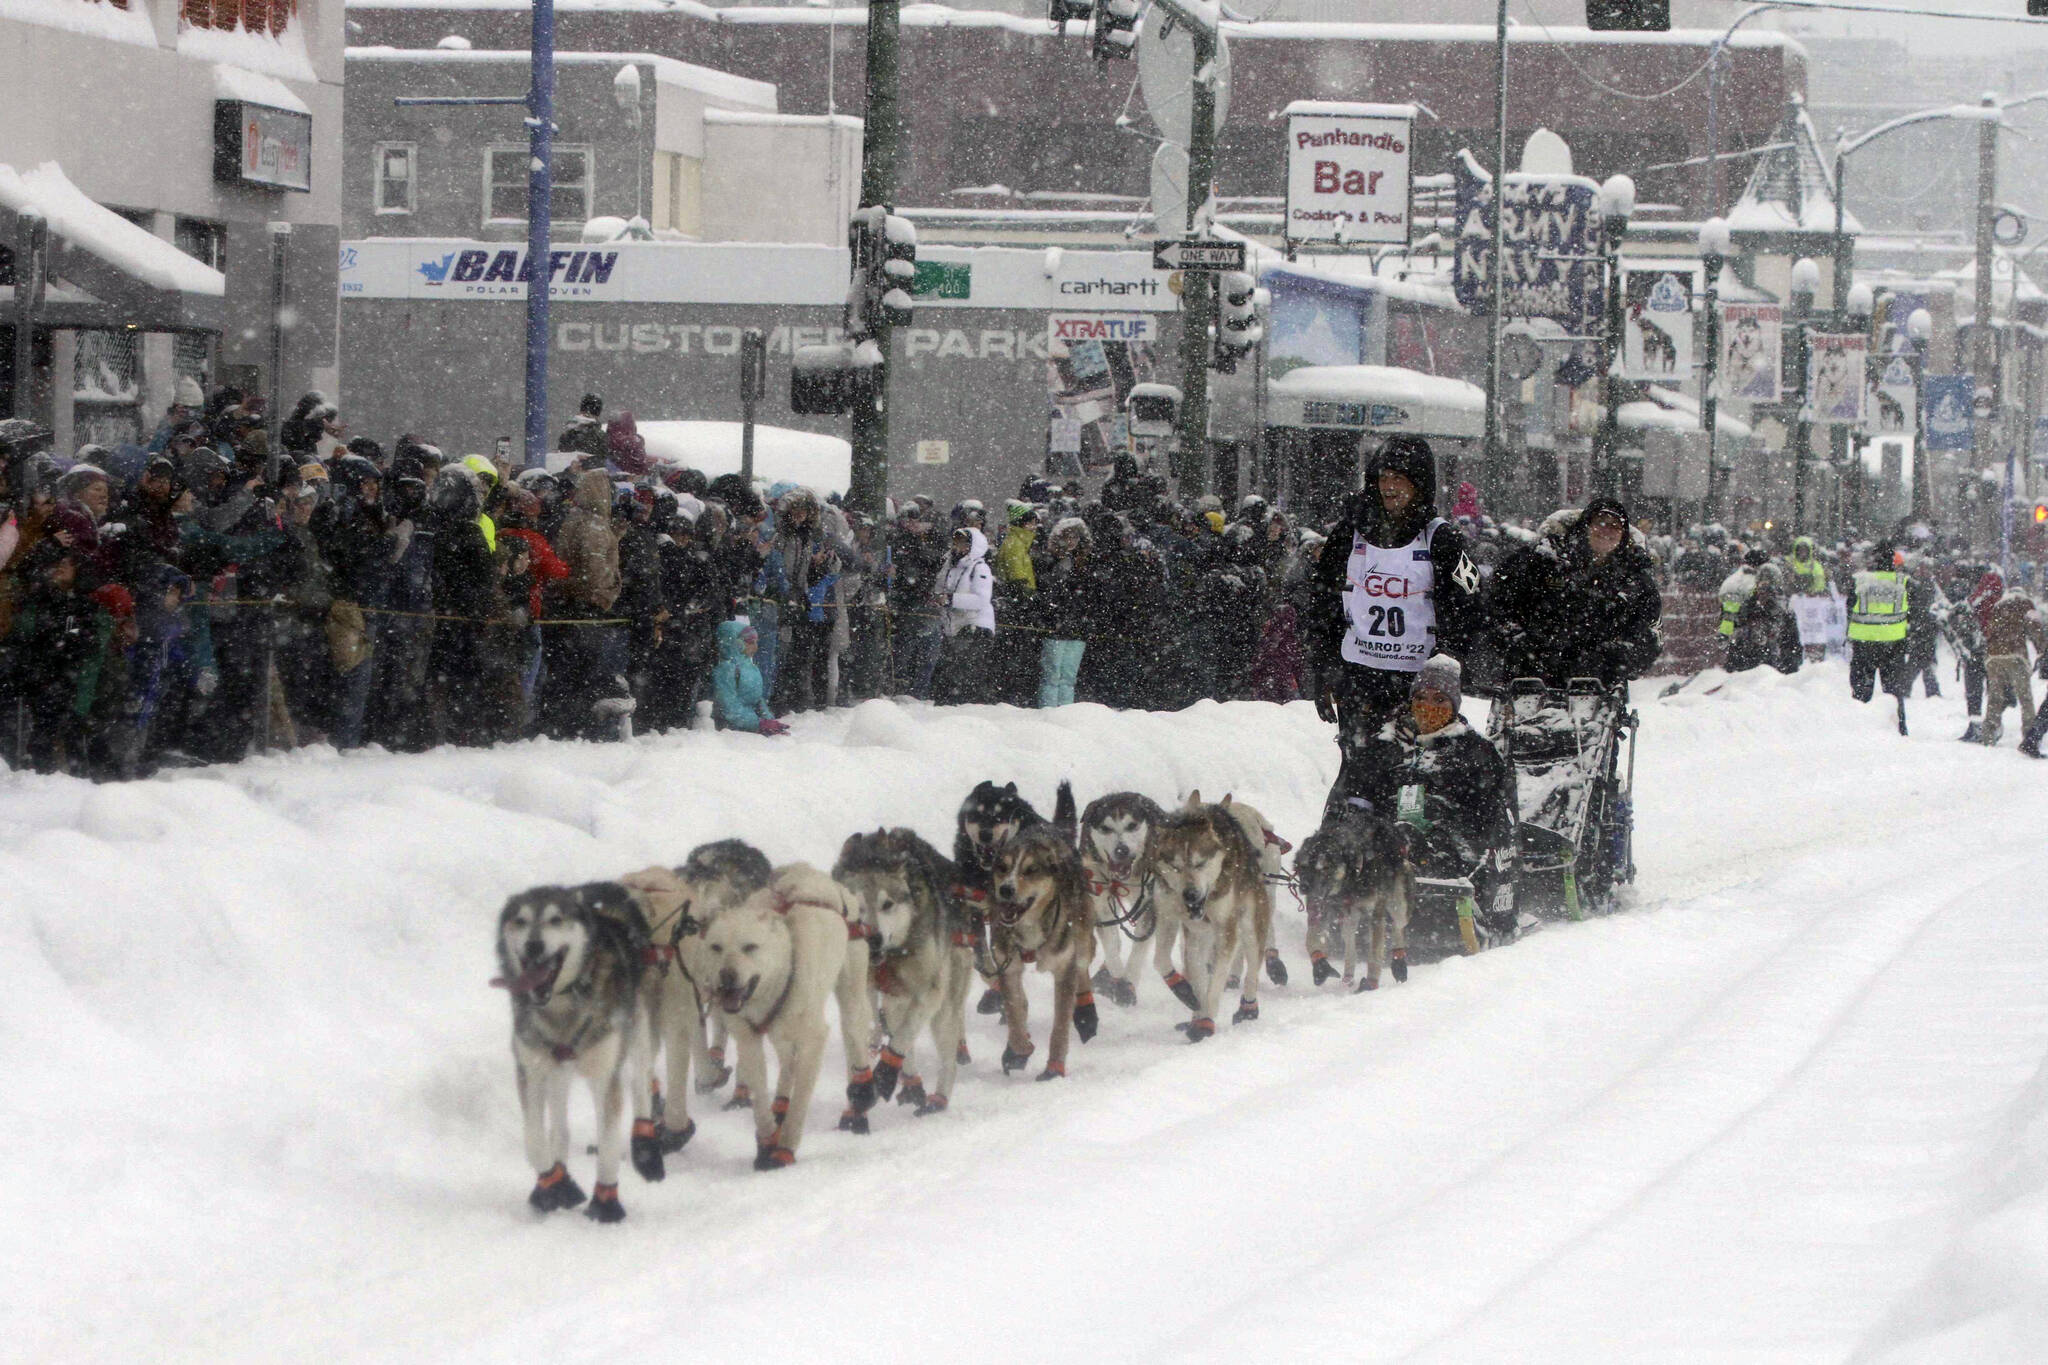 Five-time winner Dallas Seavey takes his sled dog team through a snowstorm in downtown Anchorage, Alaska, on Saturday, March 5, 2022, during the ceremonial start of the Iditarod Trail Sled Dog Race. The competitive start of the nearly 1,000-mile race will be held March 6, 2022, in Willow, Alaska, with the winner expected in the Bering Sea coastal town of Nome about nine days later. (AP Photo / Mark Thiessen)